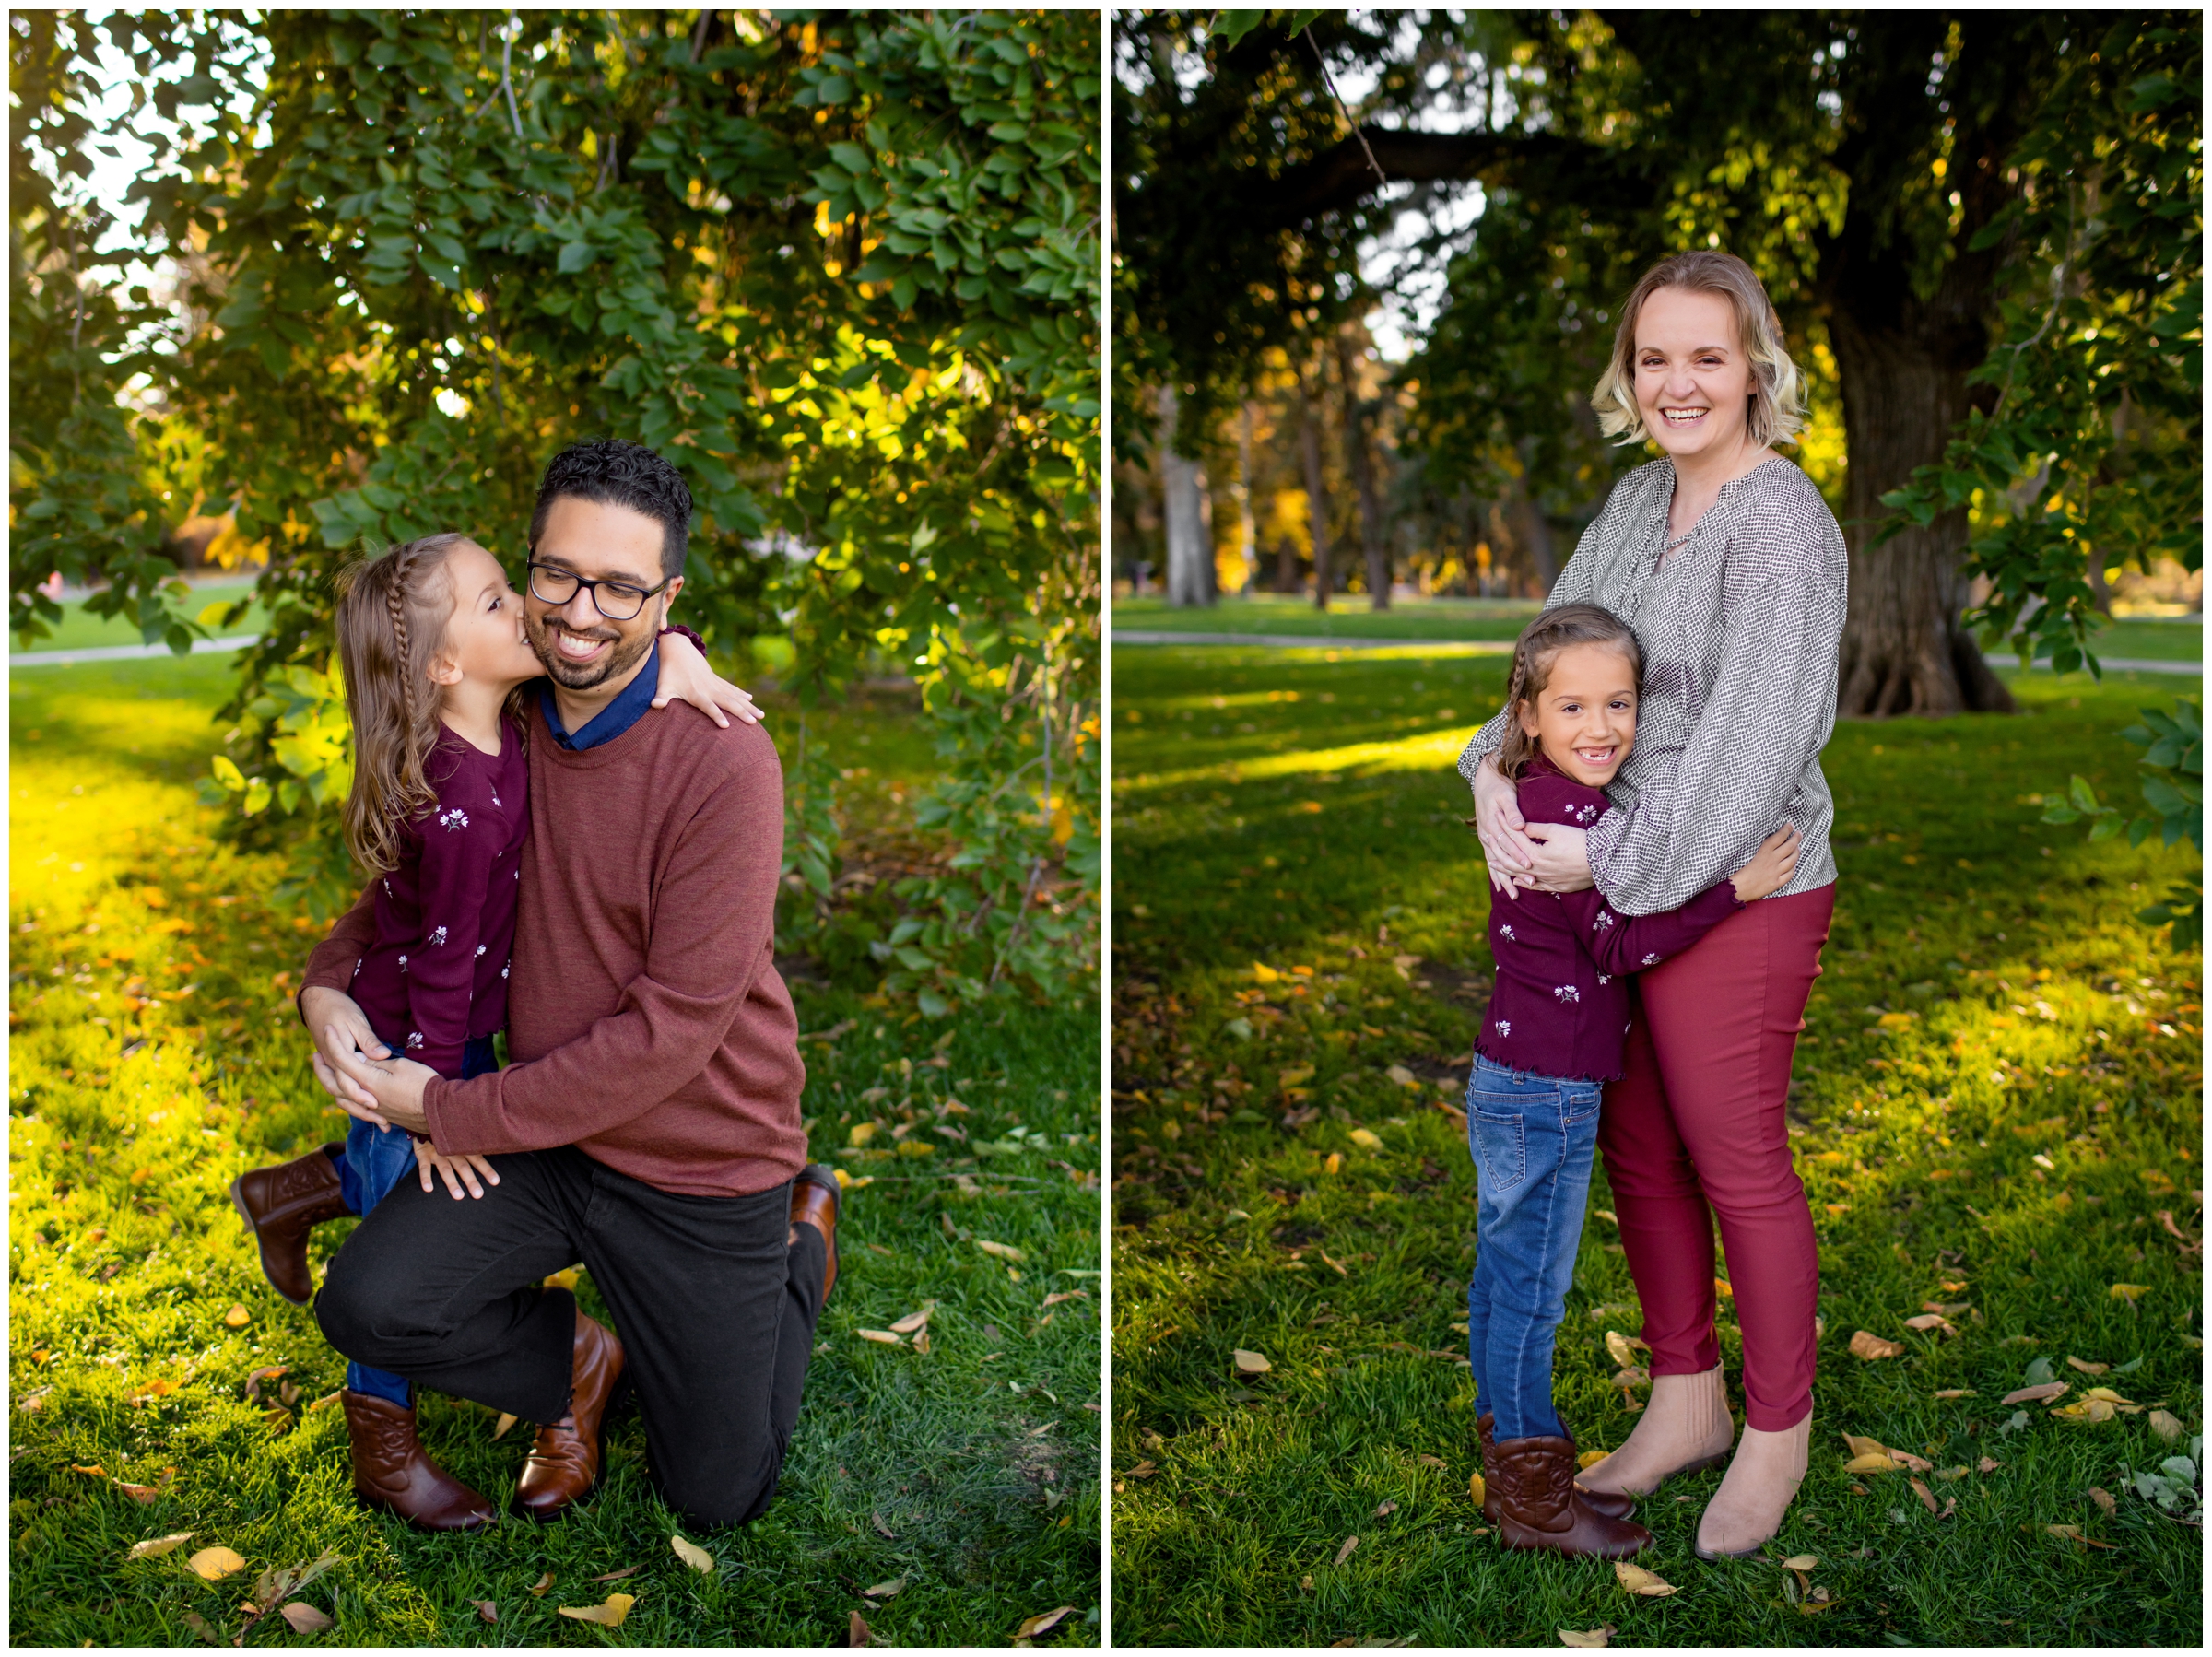 Denver family portraits during fall at Cheesman Park by Colorado photographer Plum Pretty Photography